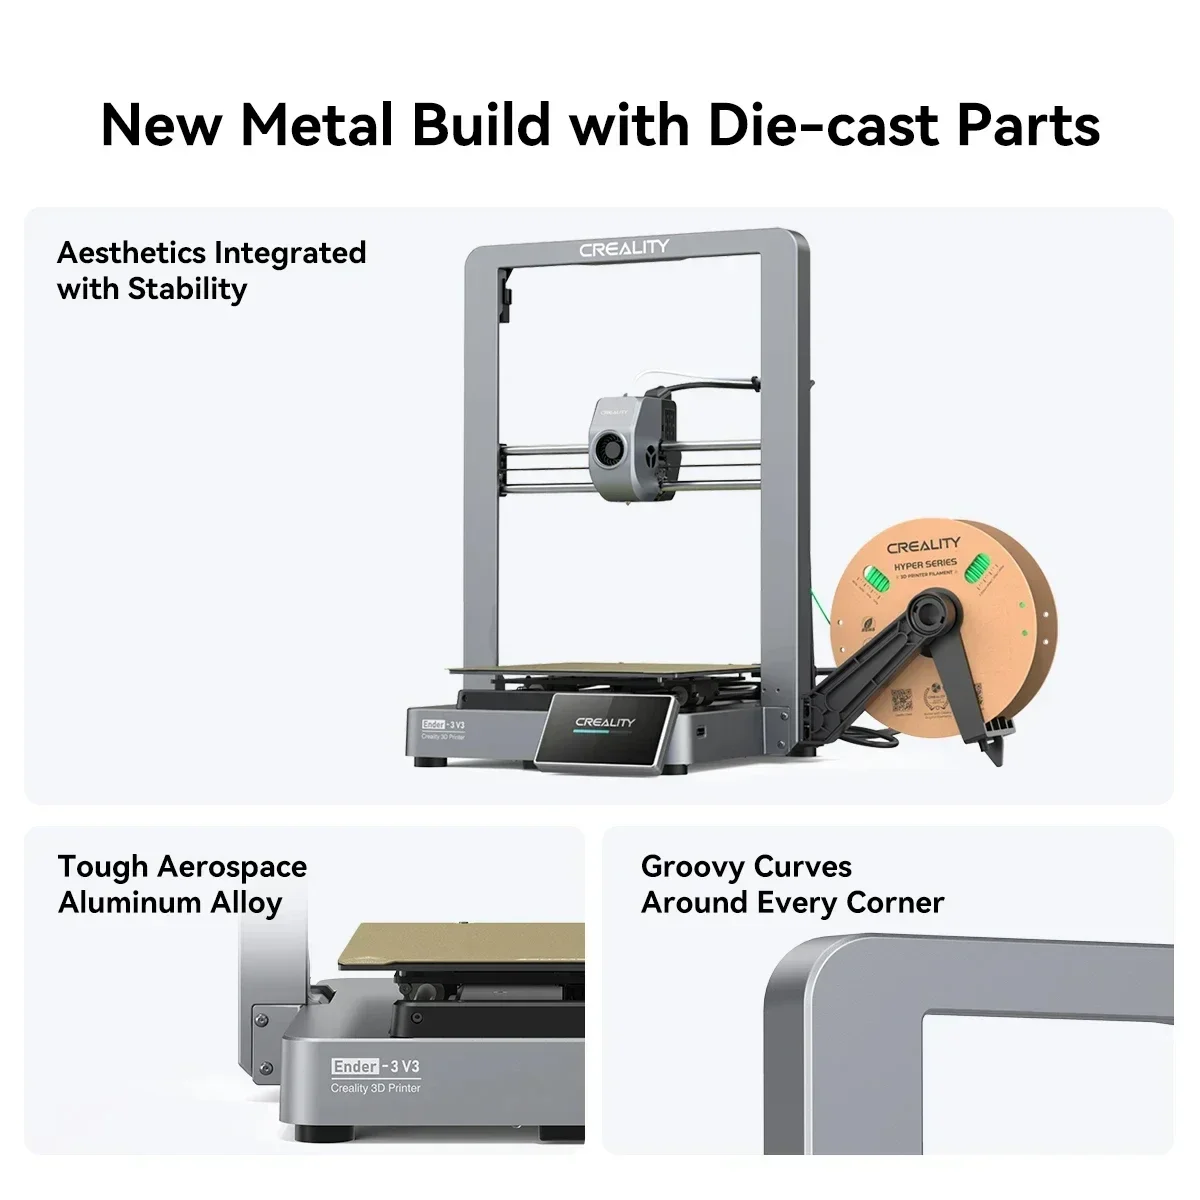 Creality New Ender 3 V3 3D Printer Stable Metal Build with Die-cast Parts Swift CoreXZ Motion System Integrated Tri-metal Nozzle